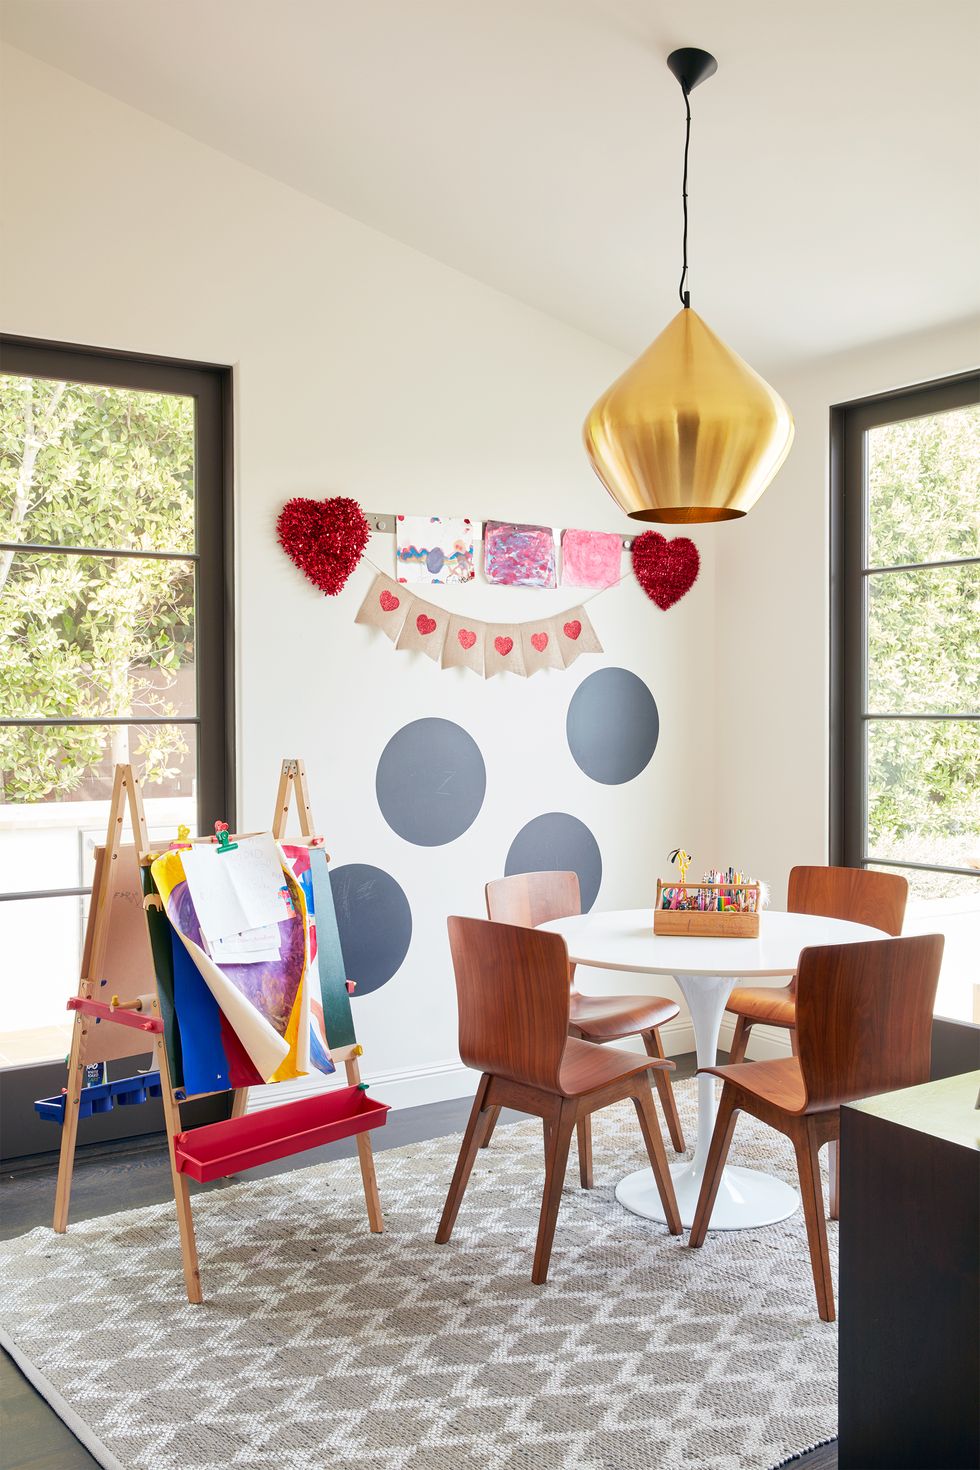 Top 10 Craft Rooms  Craft room tables, Small craft rooms, Craft room design